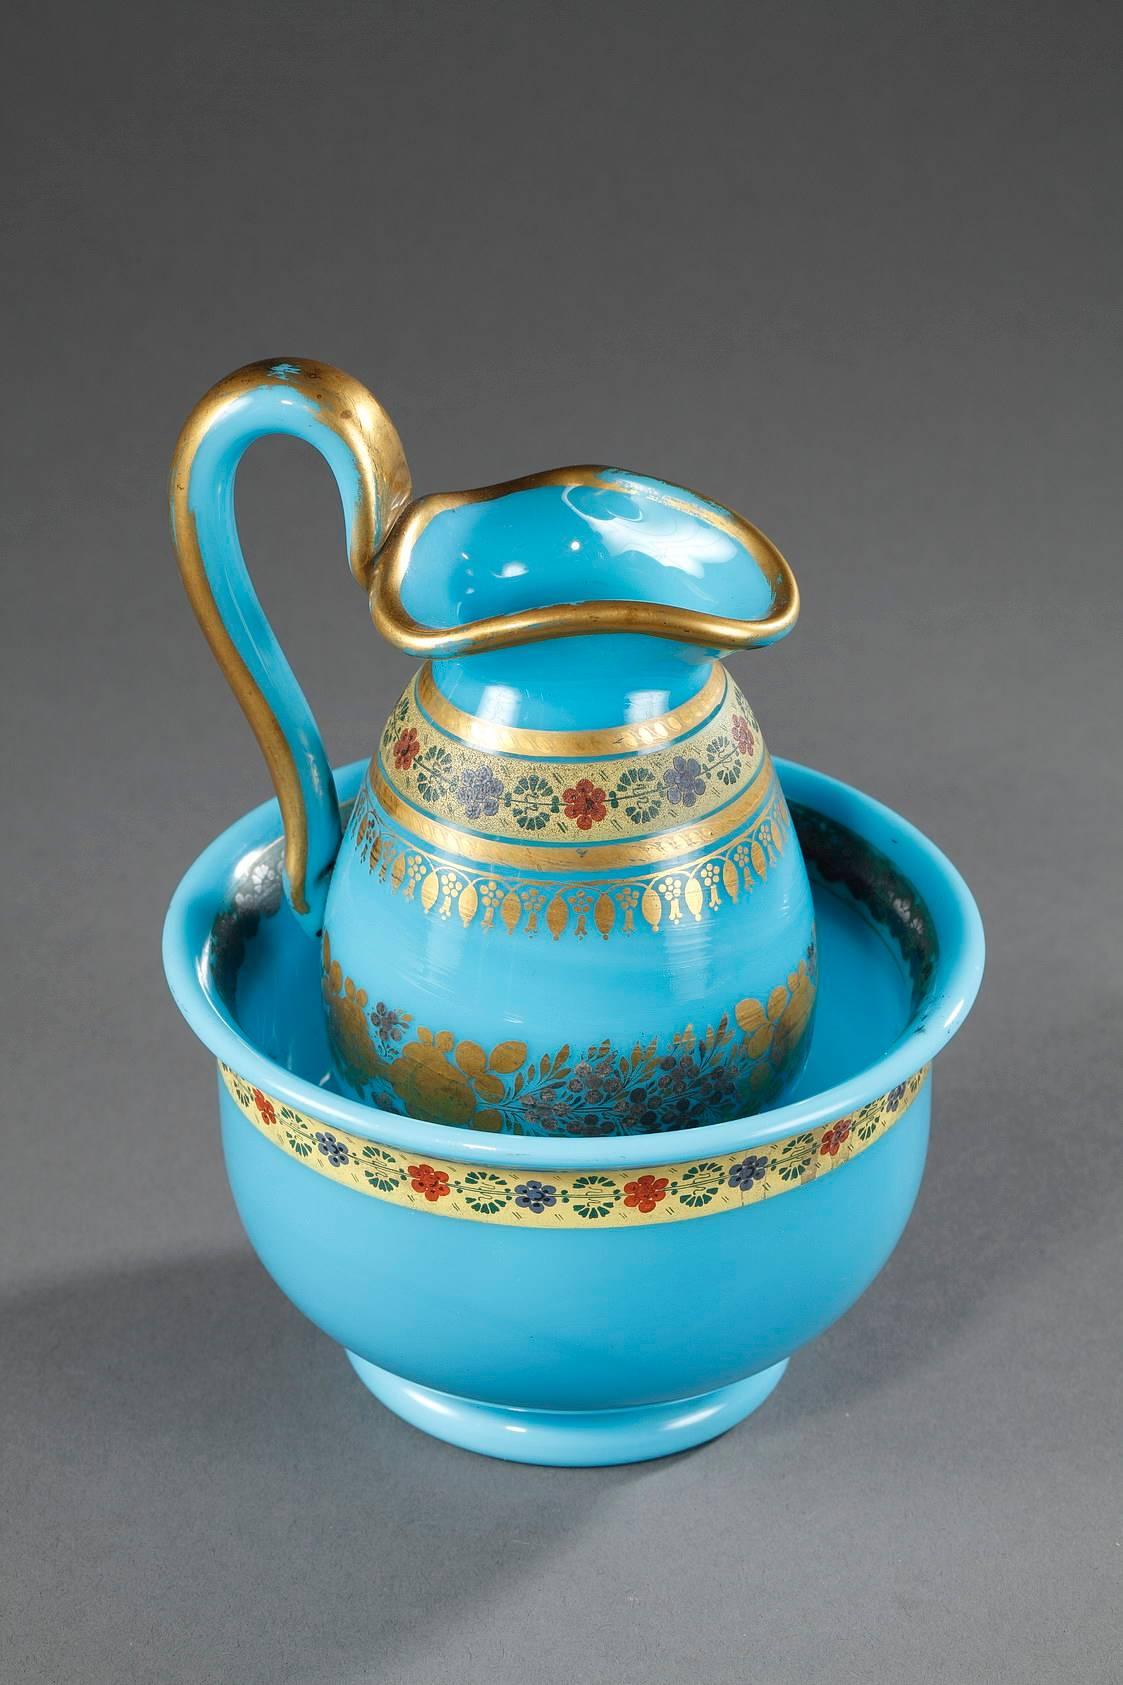 Bowl with its egg-shaped pitcher in turquoise-blue opaline crystal. They are decorated with gold, blue, and red friezes of anemones and forget-me-nots on a gilded background. Bouquets of roses and forget-me-nots adorn the paunch of the pitcher, and